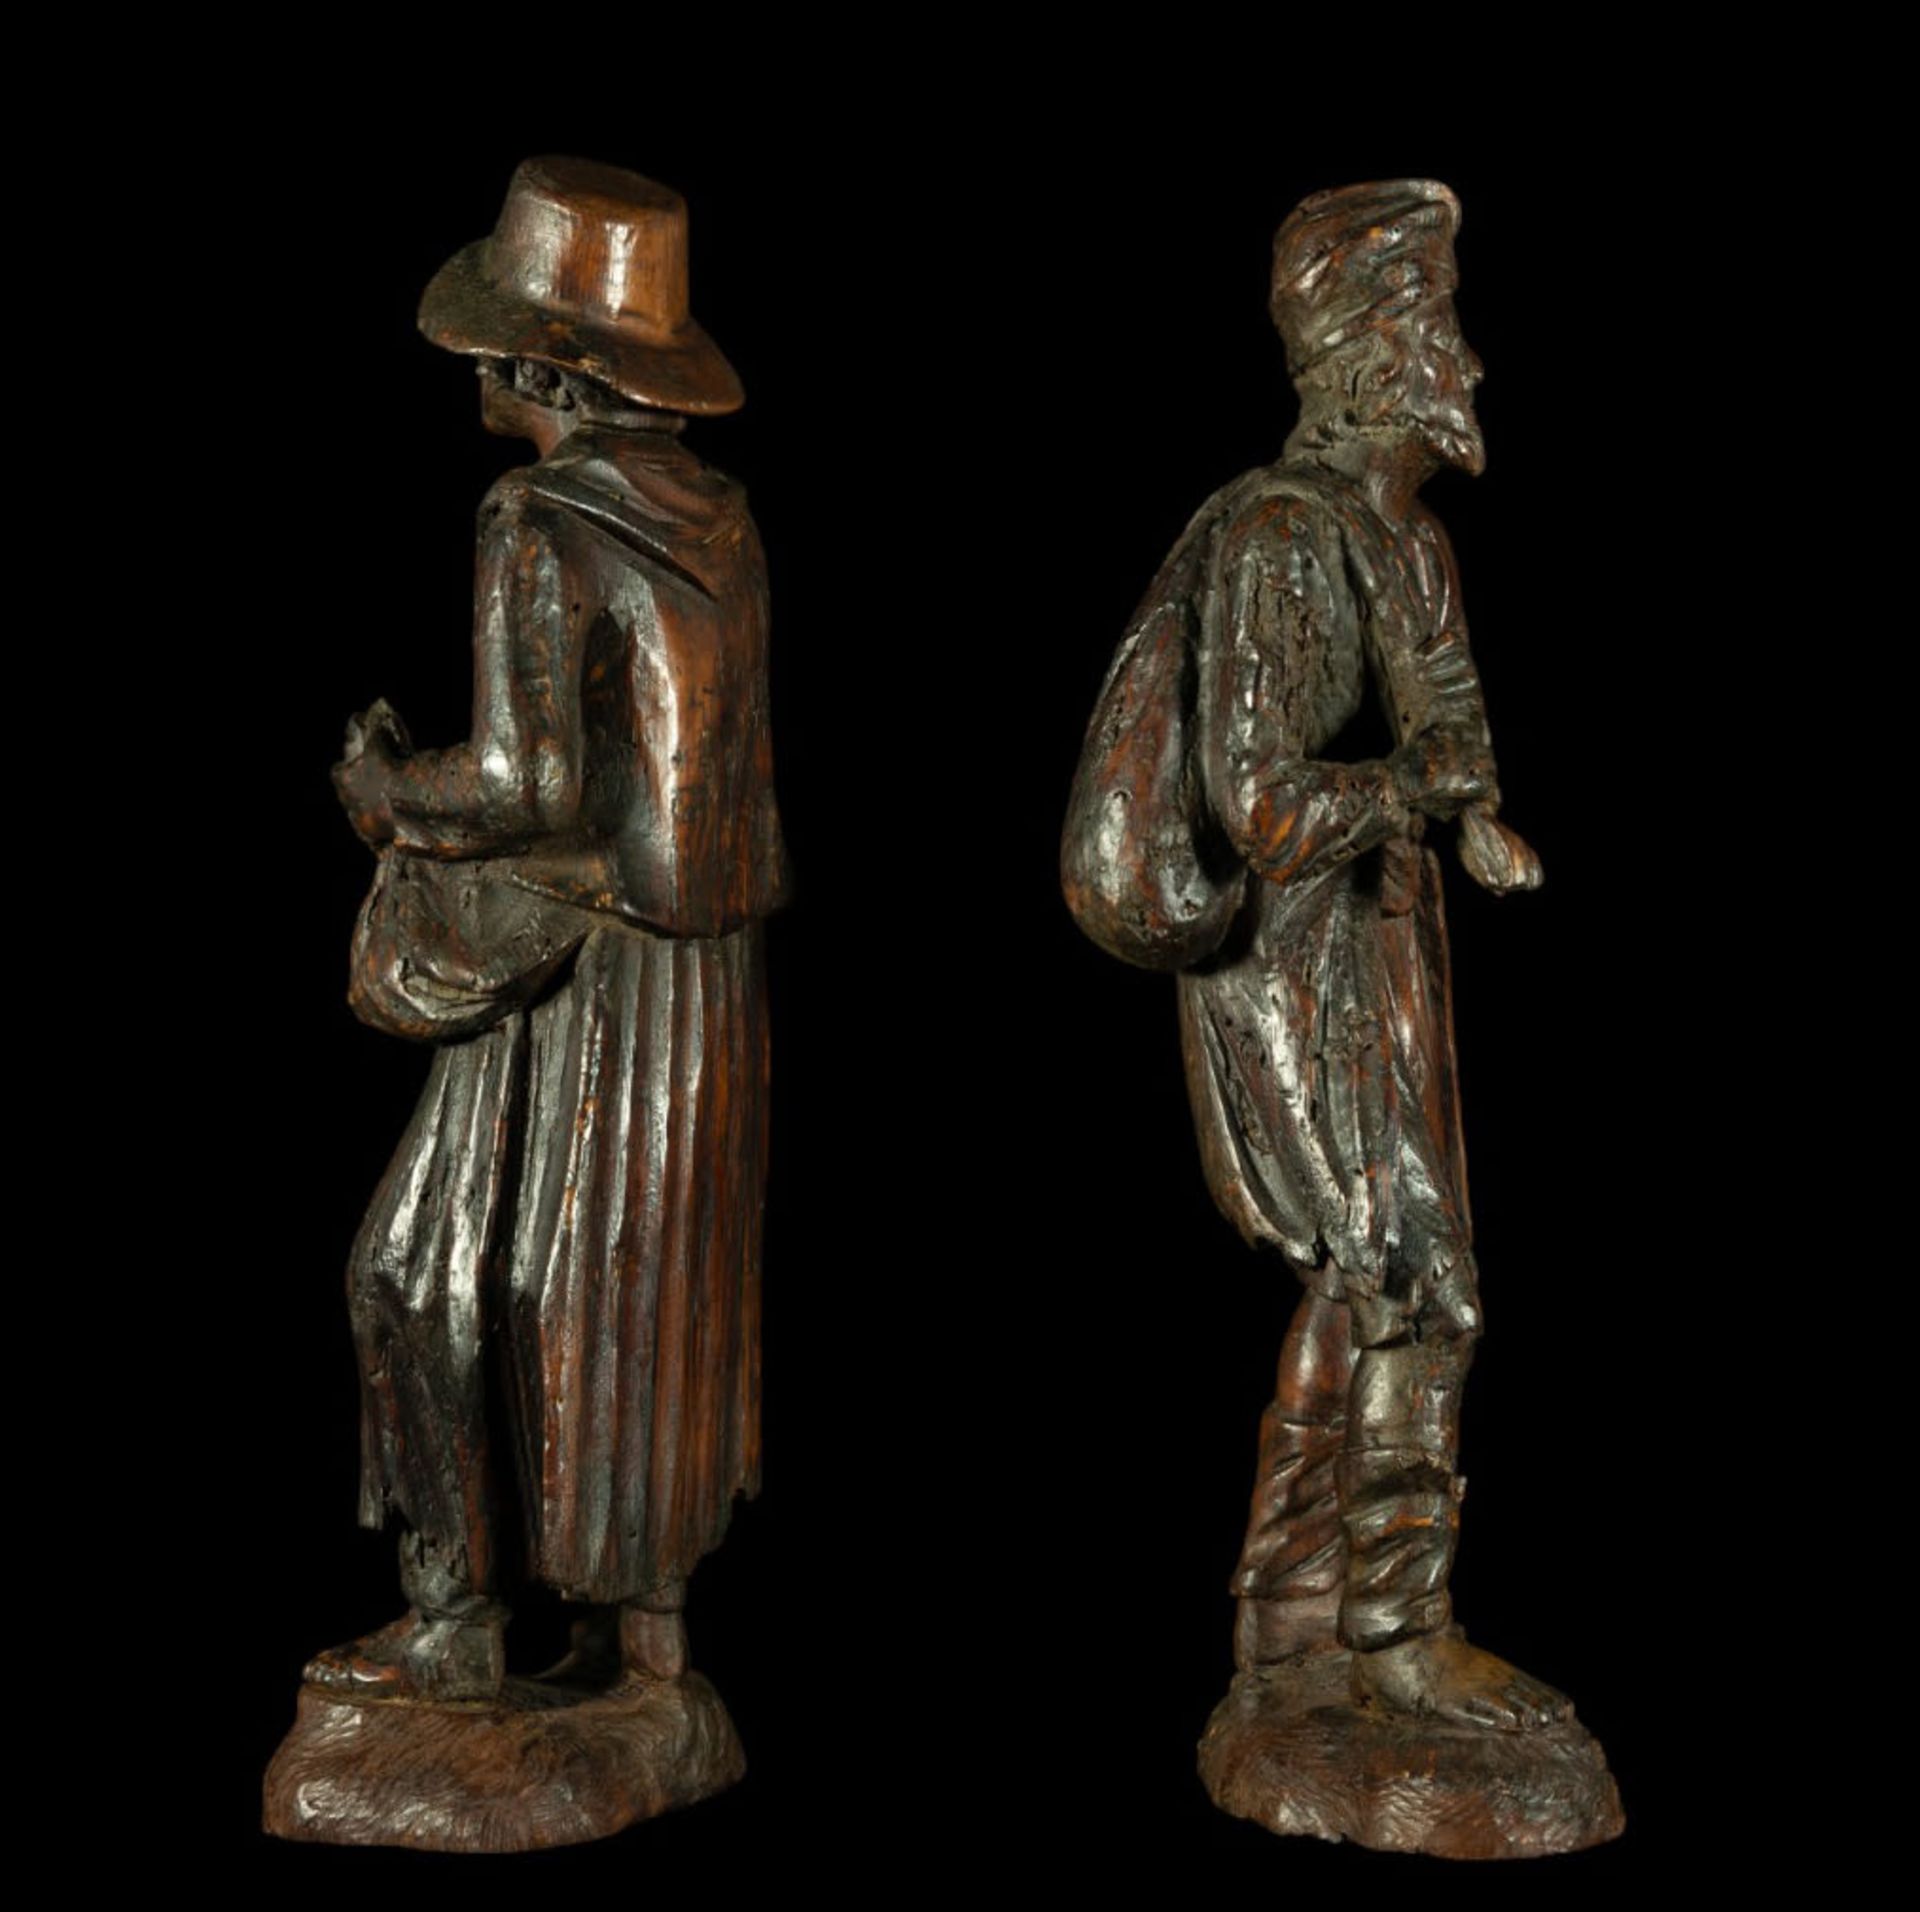 Rare pair of 18th century German Black Forest Beggars, Simon Trojer (manner of) - Image 3 of 5